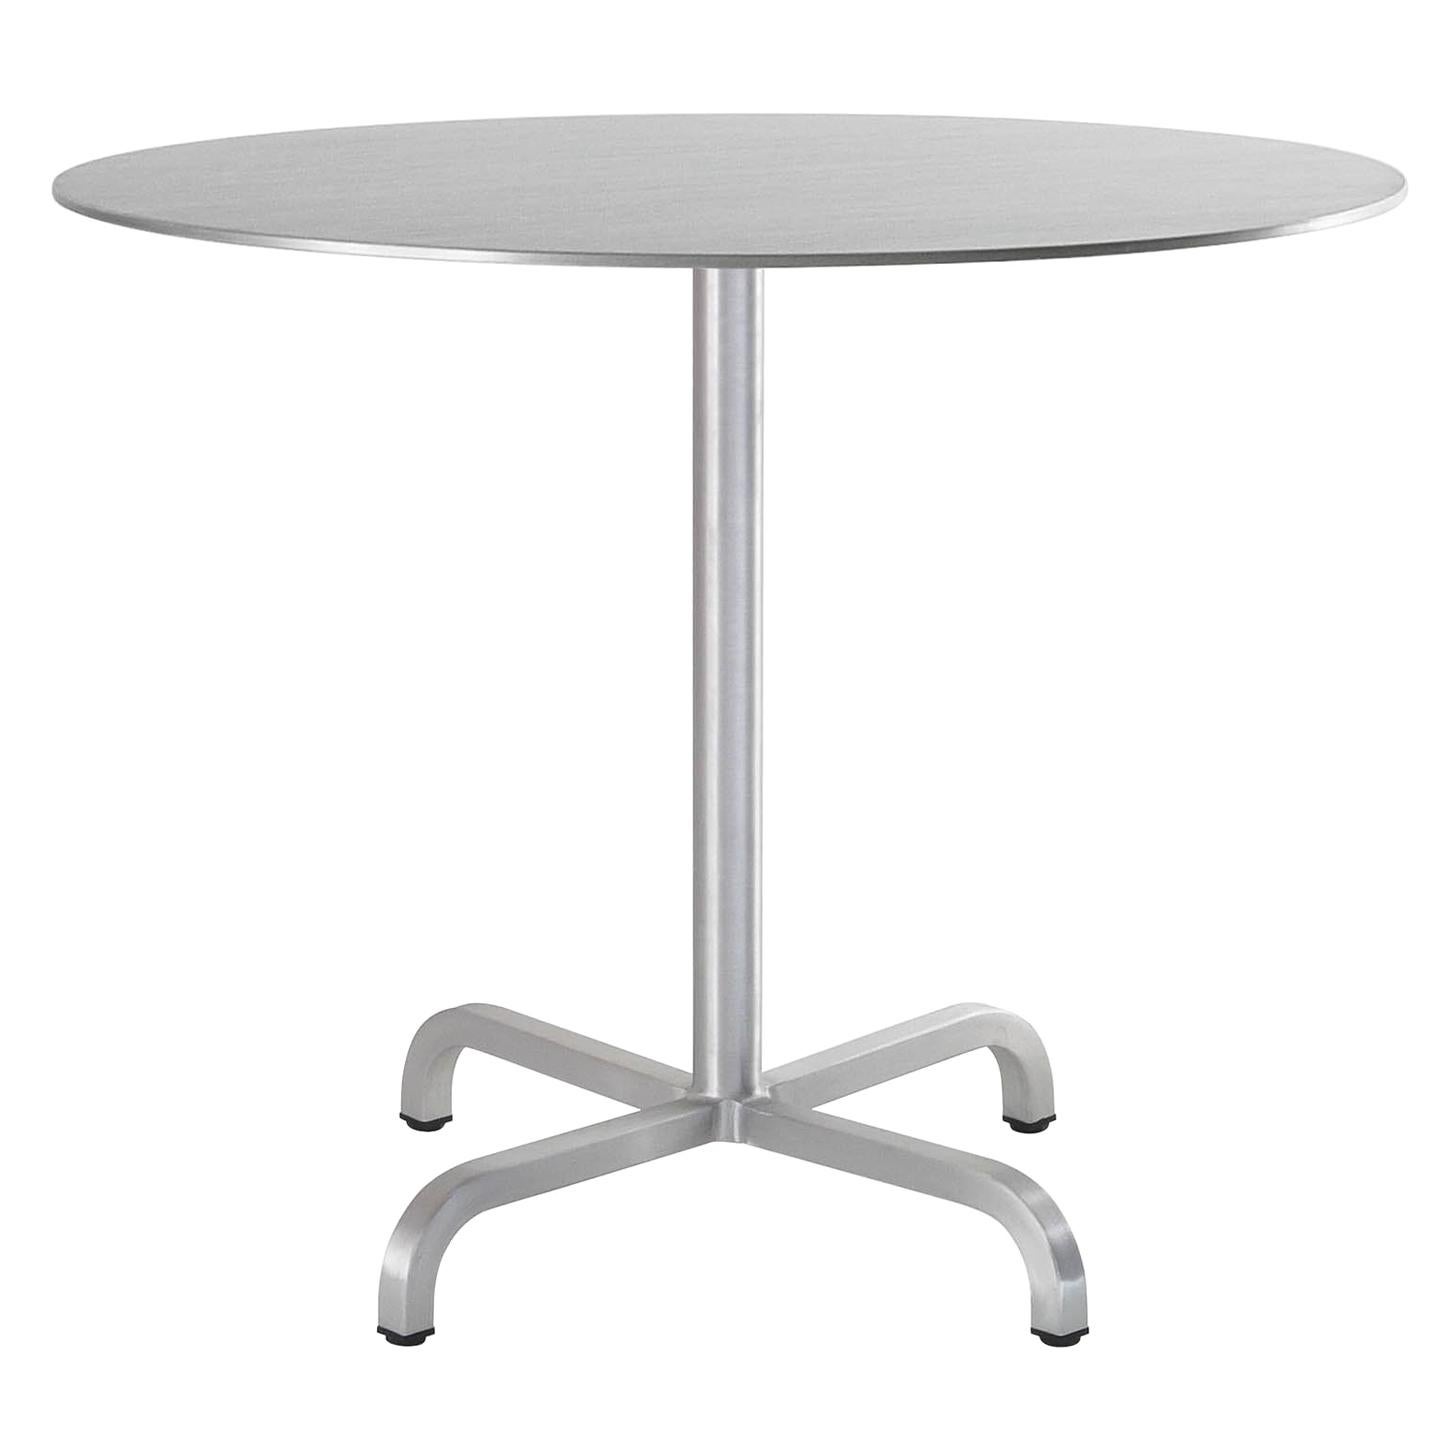 Emeco 20-06 Large Round Café Table in Brushed Aluminum by Norman Foster For Sale